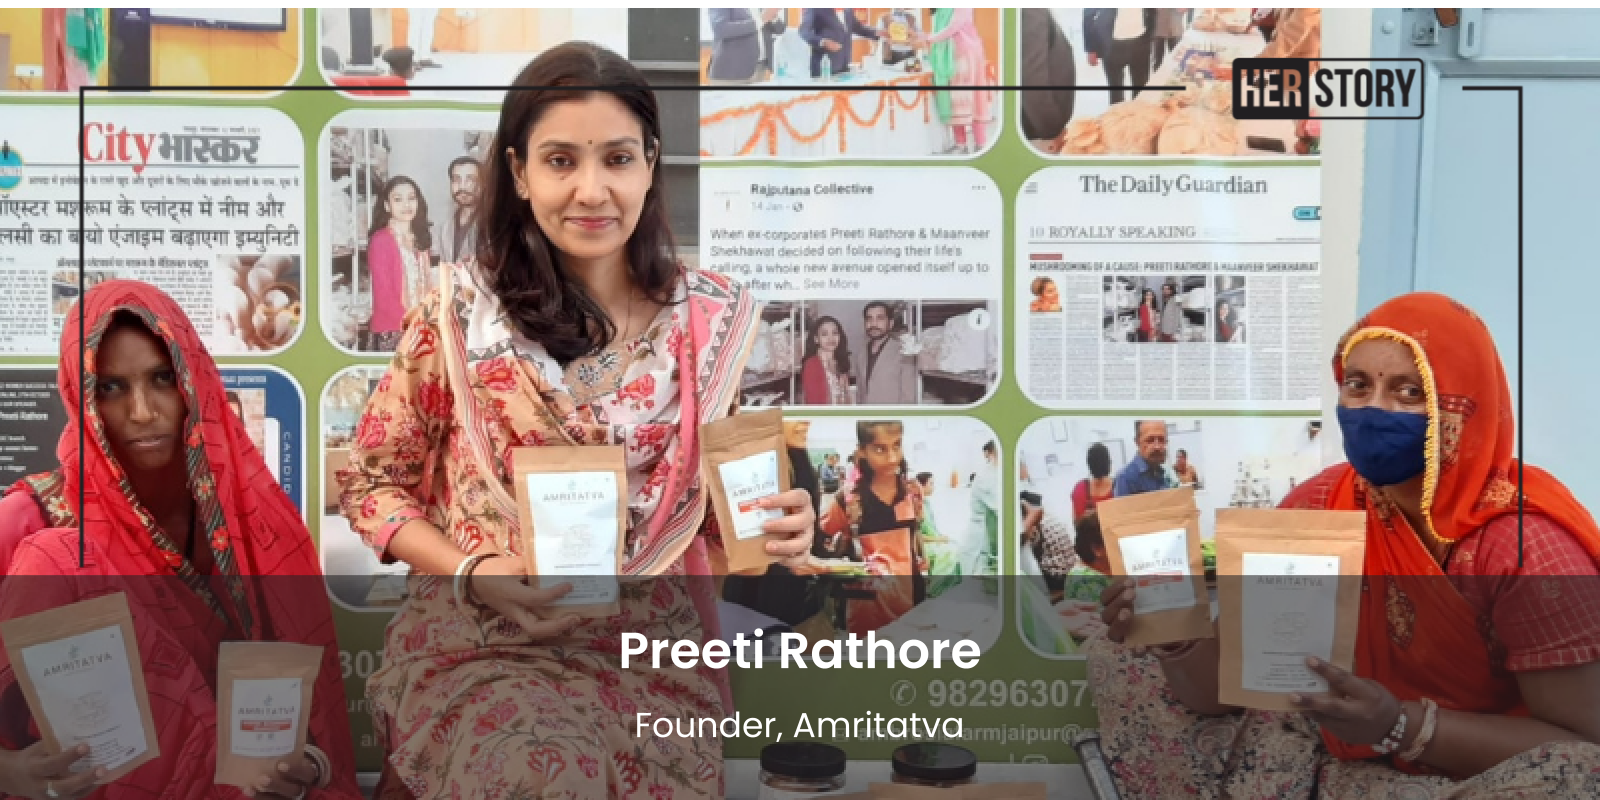 Meet the woman entrepreneur whose startup 'mushroomed' digitally amid the pandemic

